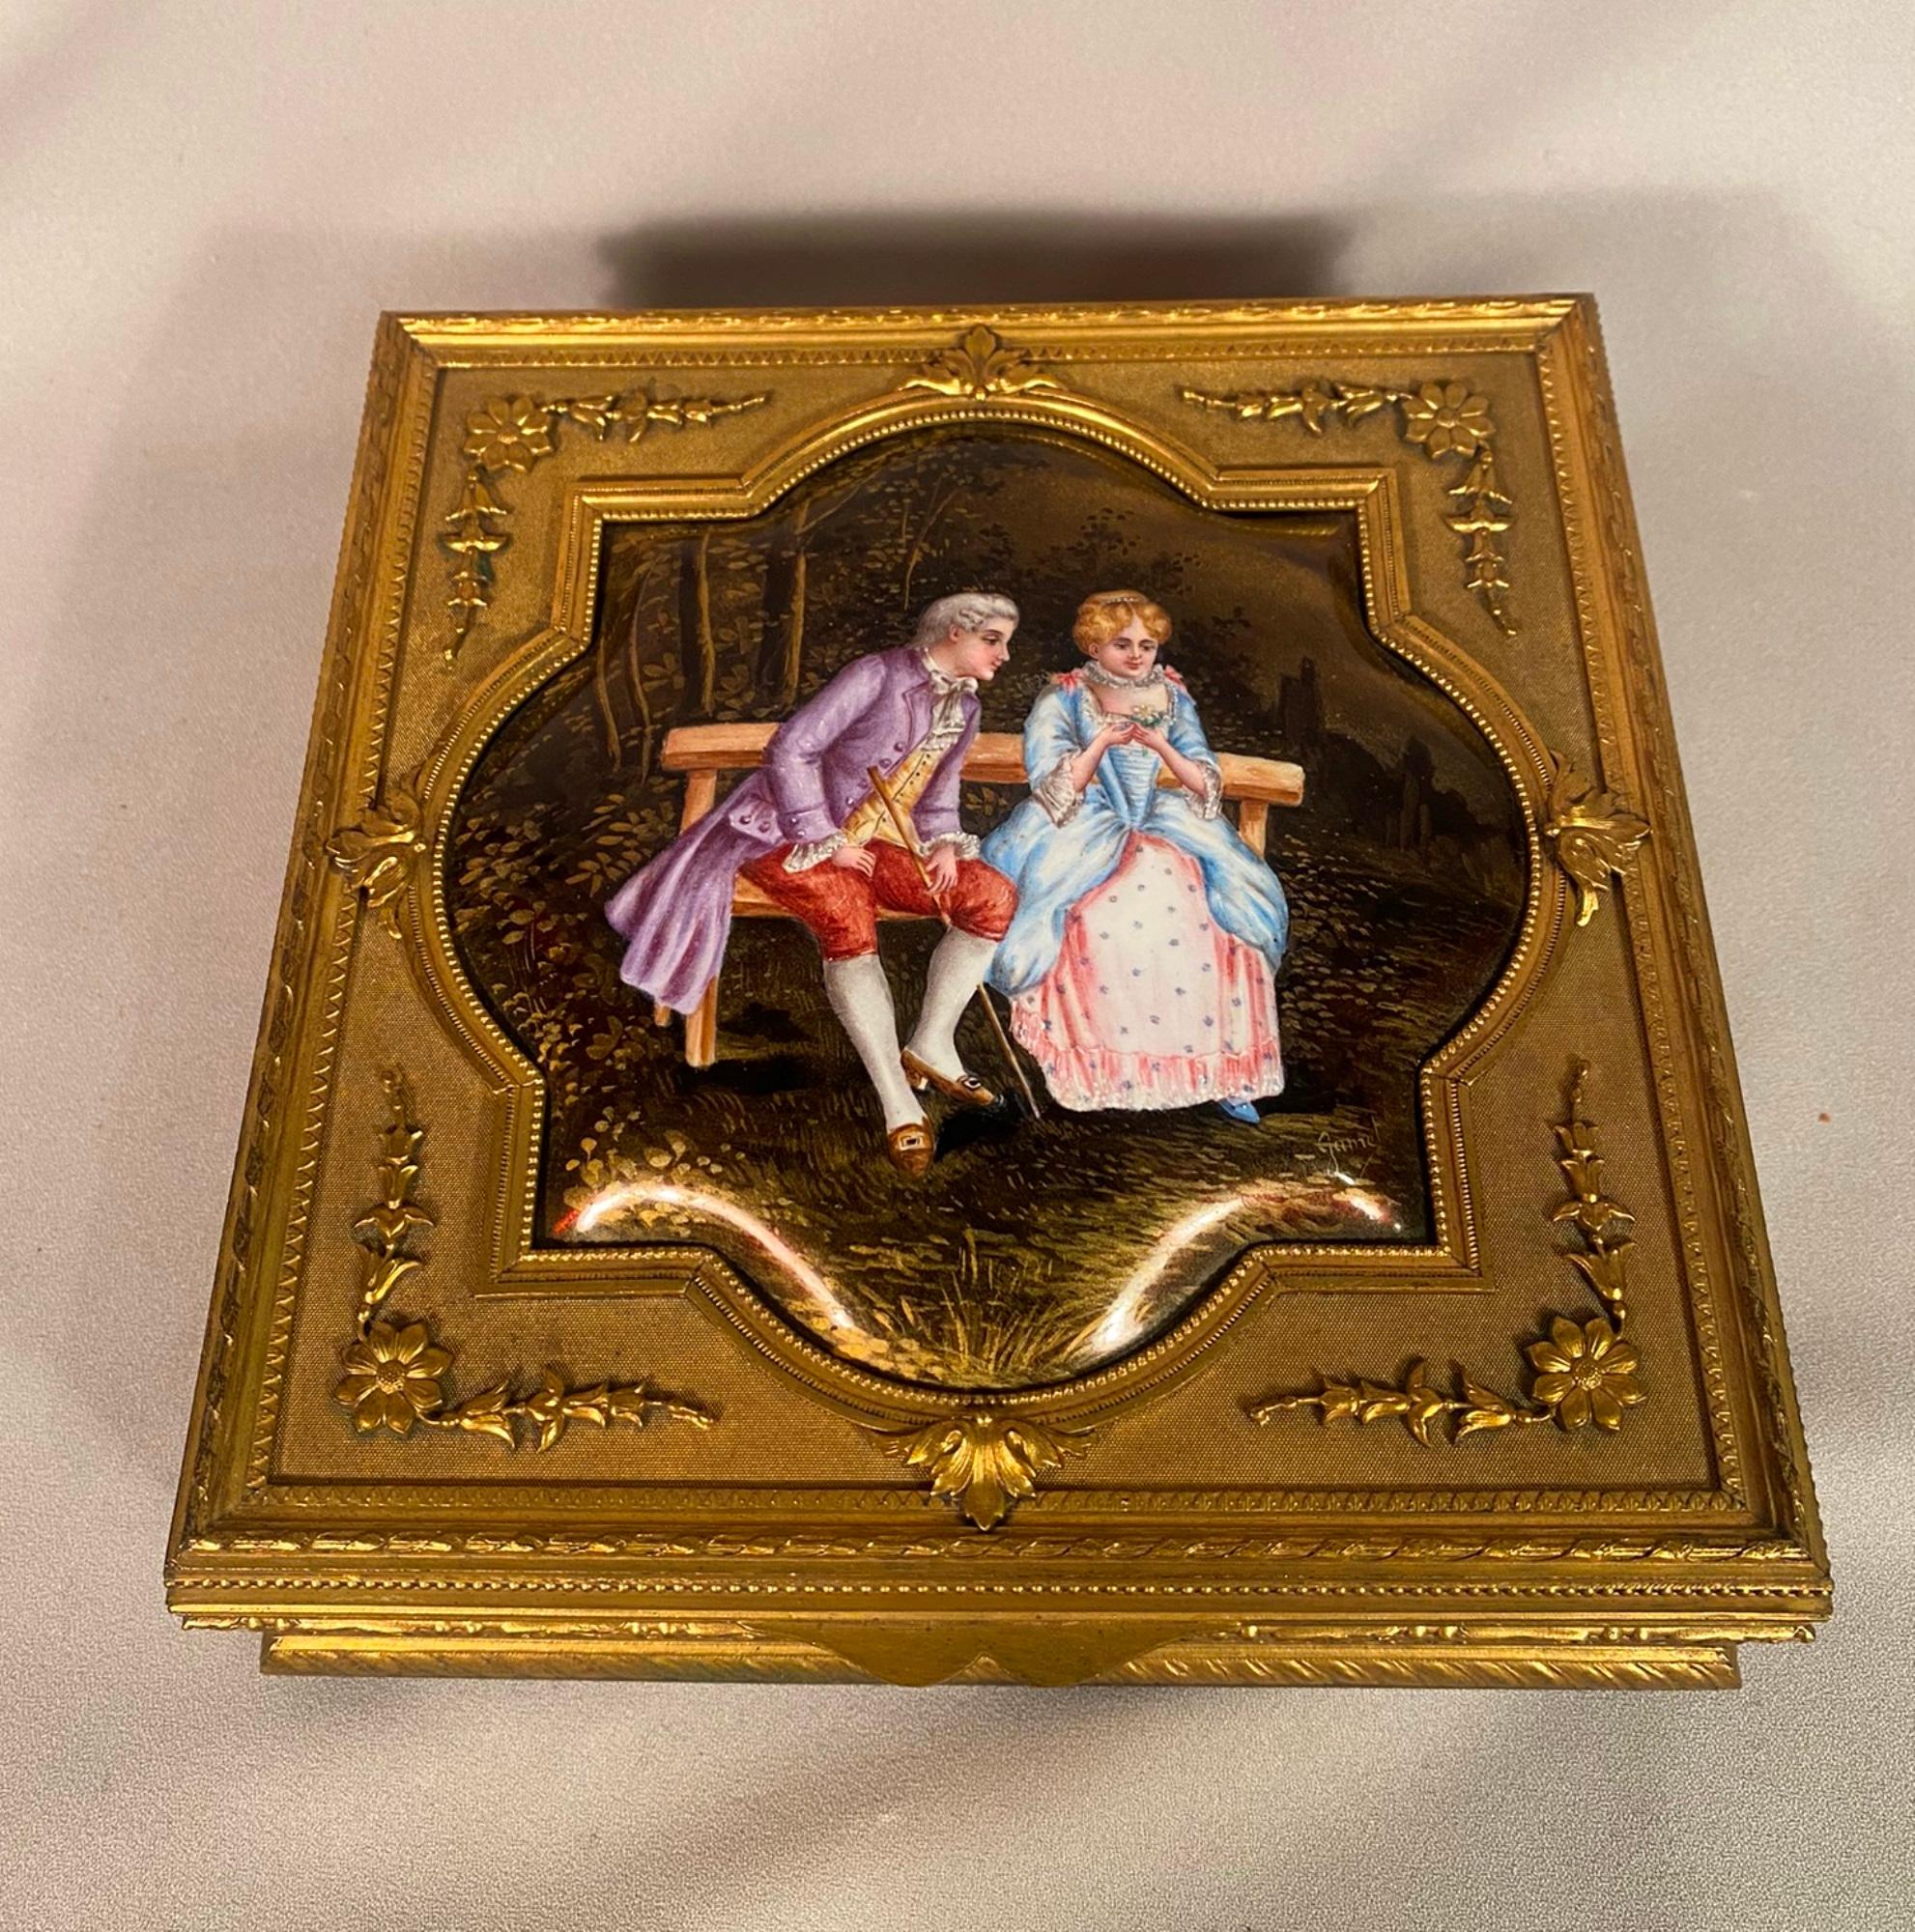 This is a stunning large antique French bronze jewelry box with an enamel painting of two classical lovers.  The enamel is signed Garnet amazing detail and quality.  The bronze work of the box is very well done.  The interior has a peach-colored